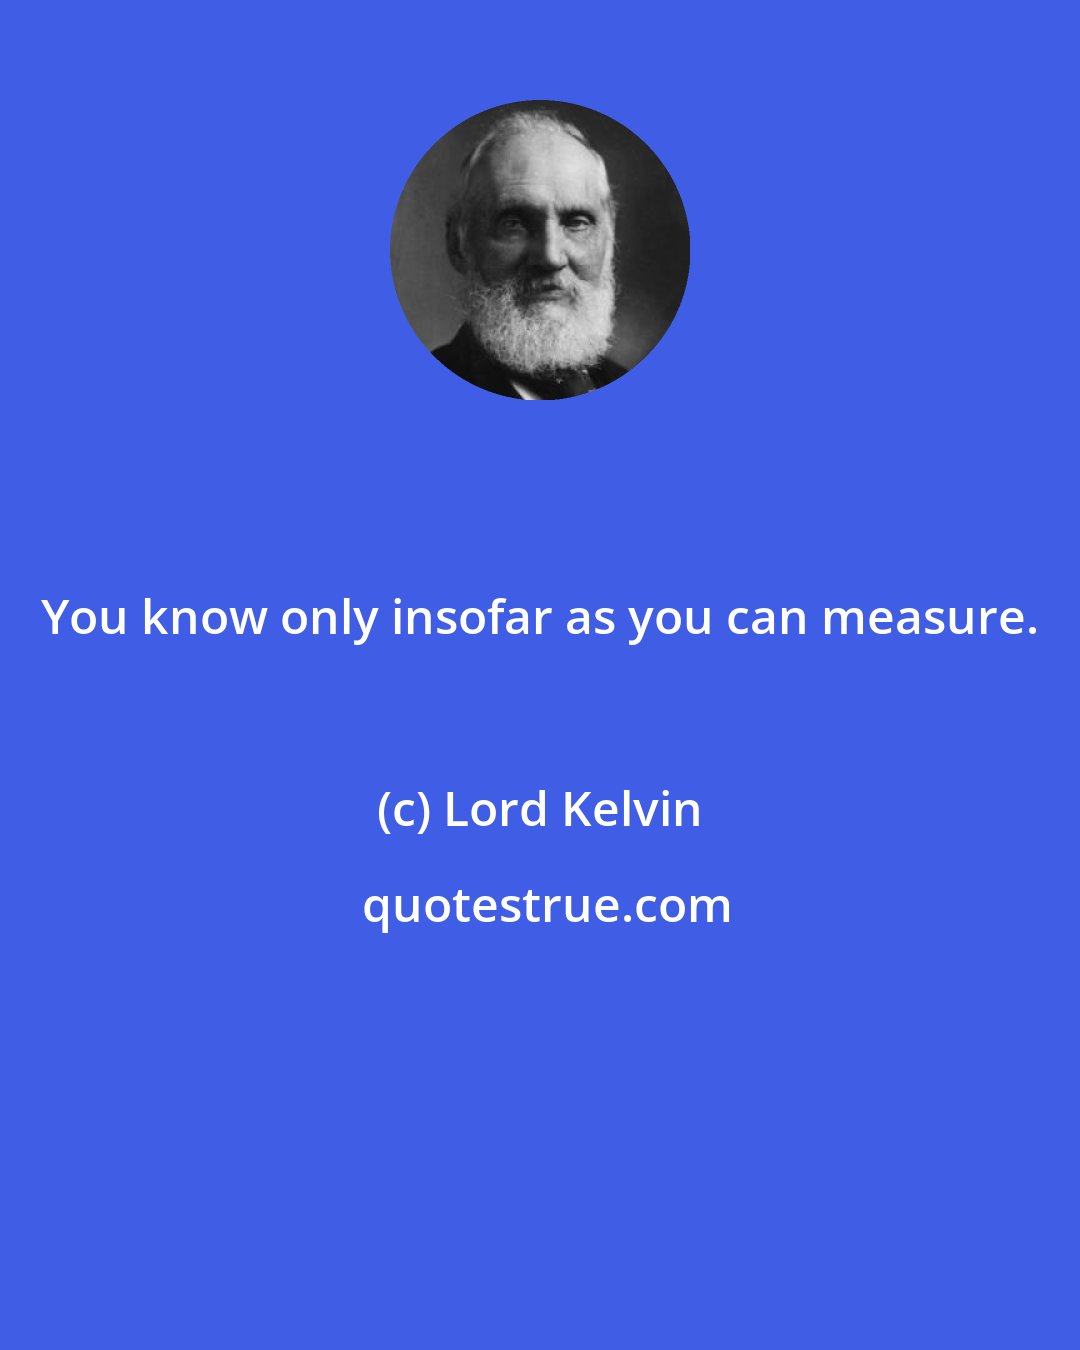 Lord Kelvin: You know only insofar as you can measure.